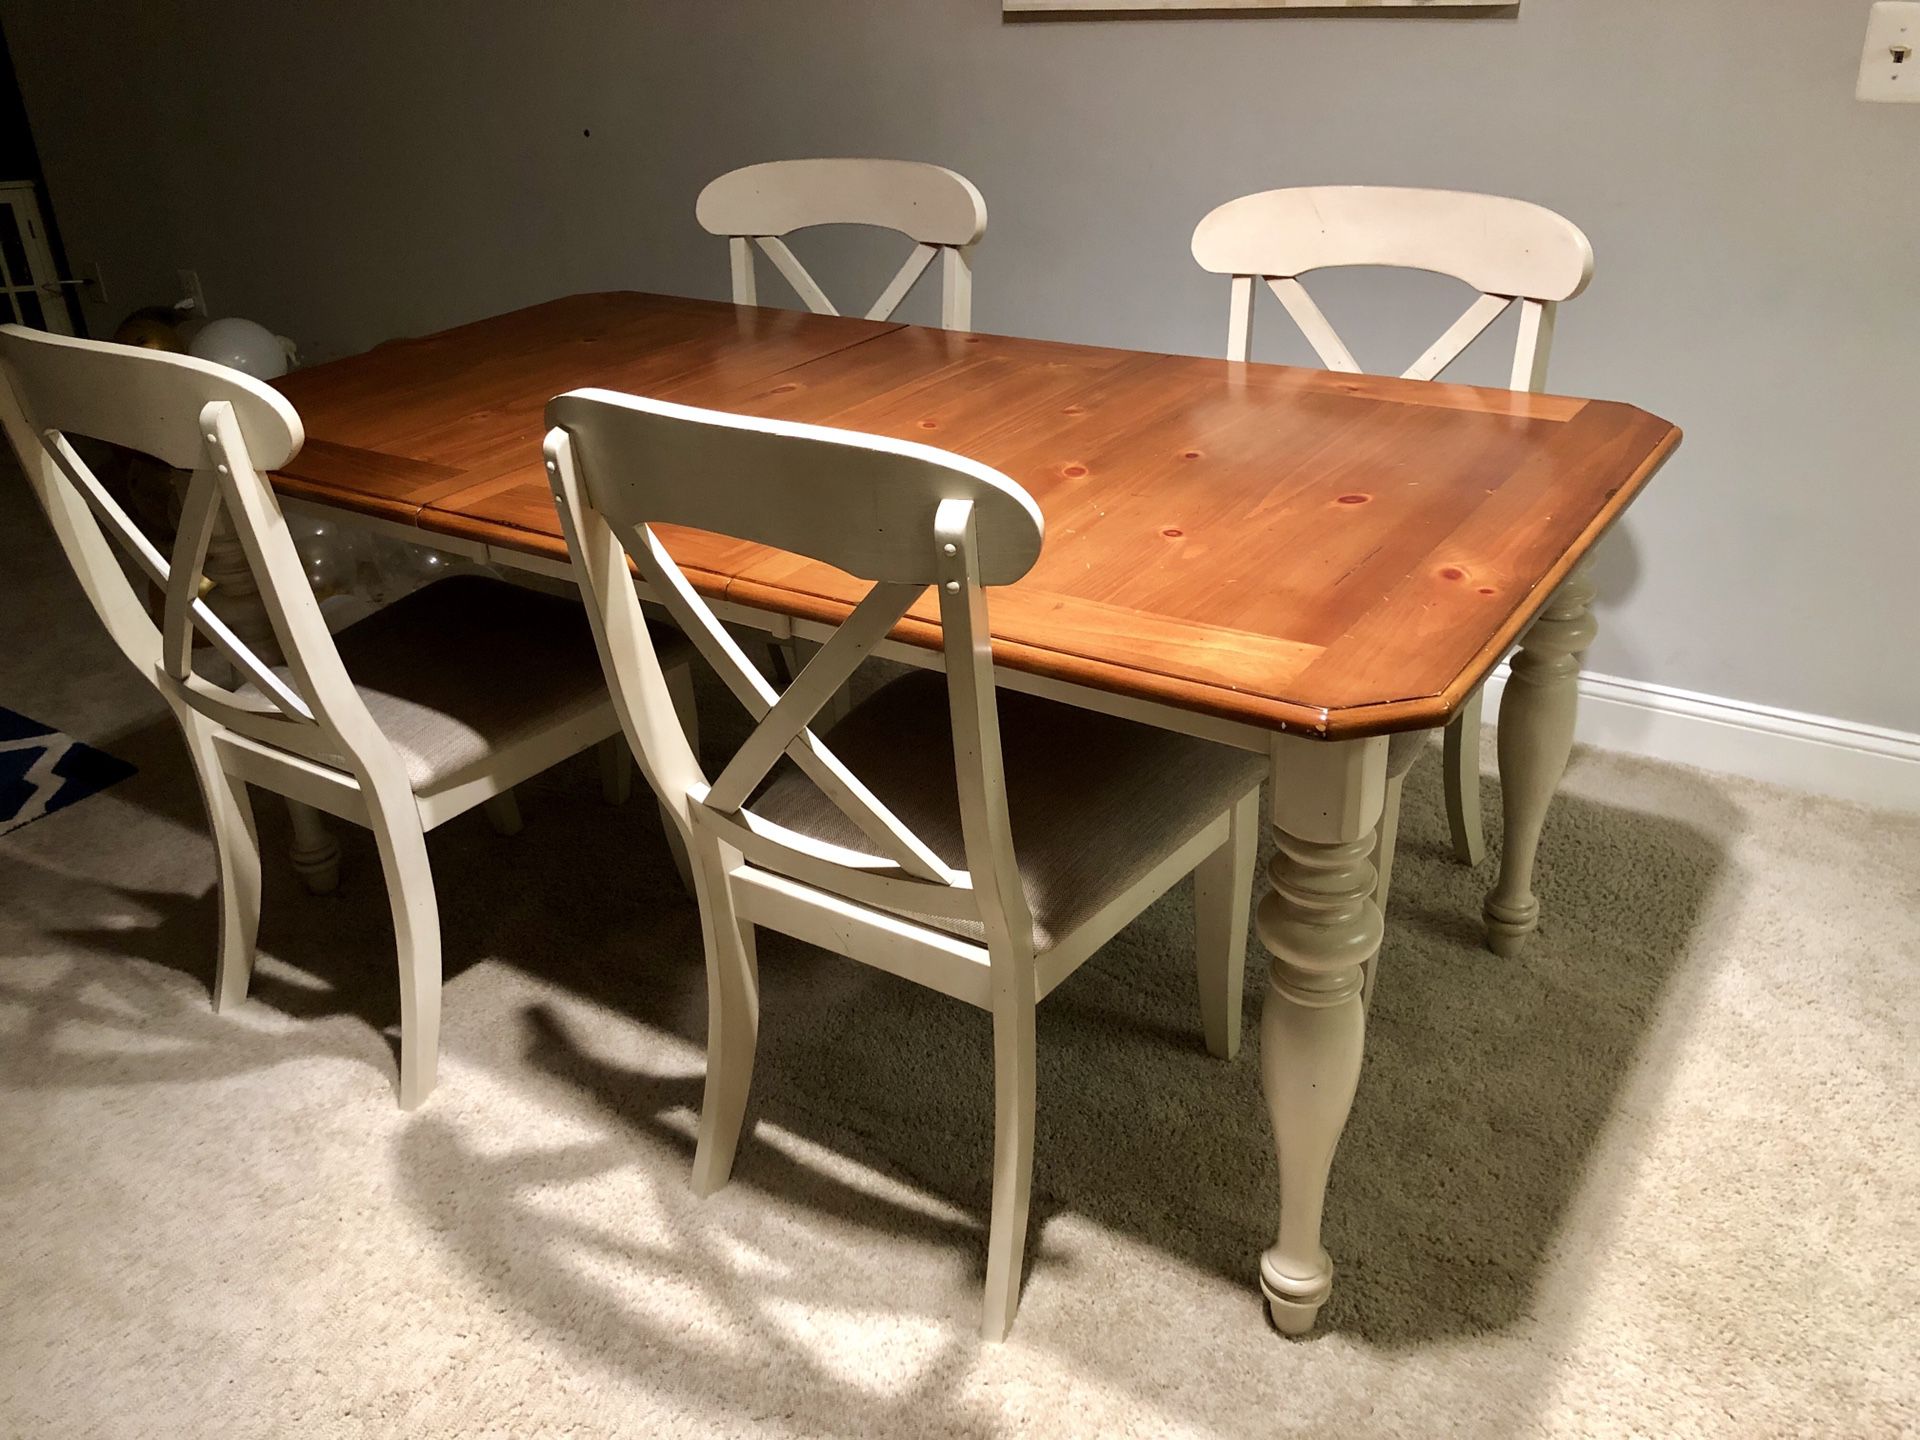 5-Piece Dining Table Set (4 chairs, table with leaf)